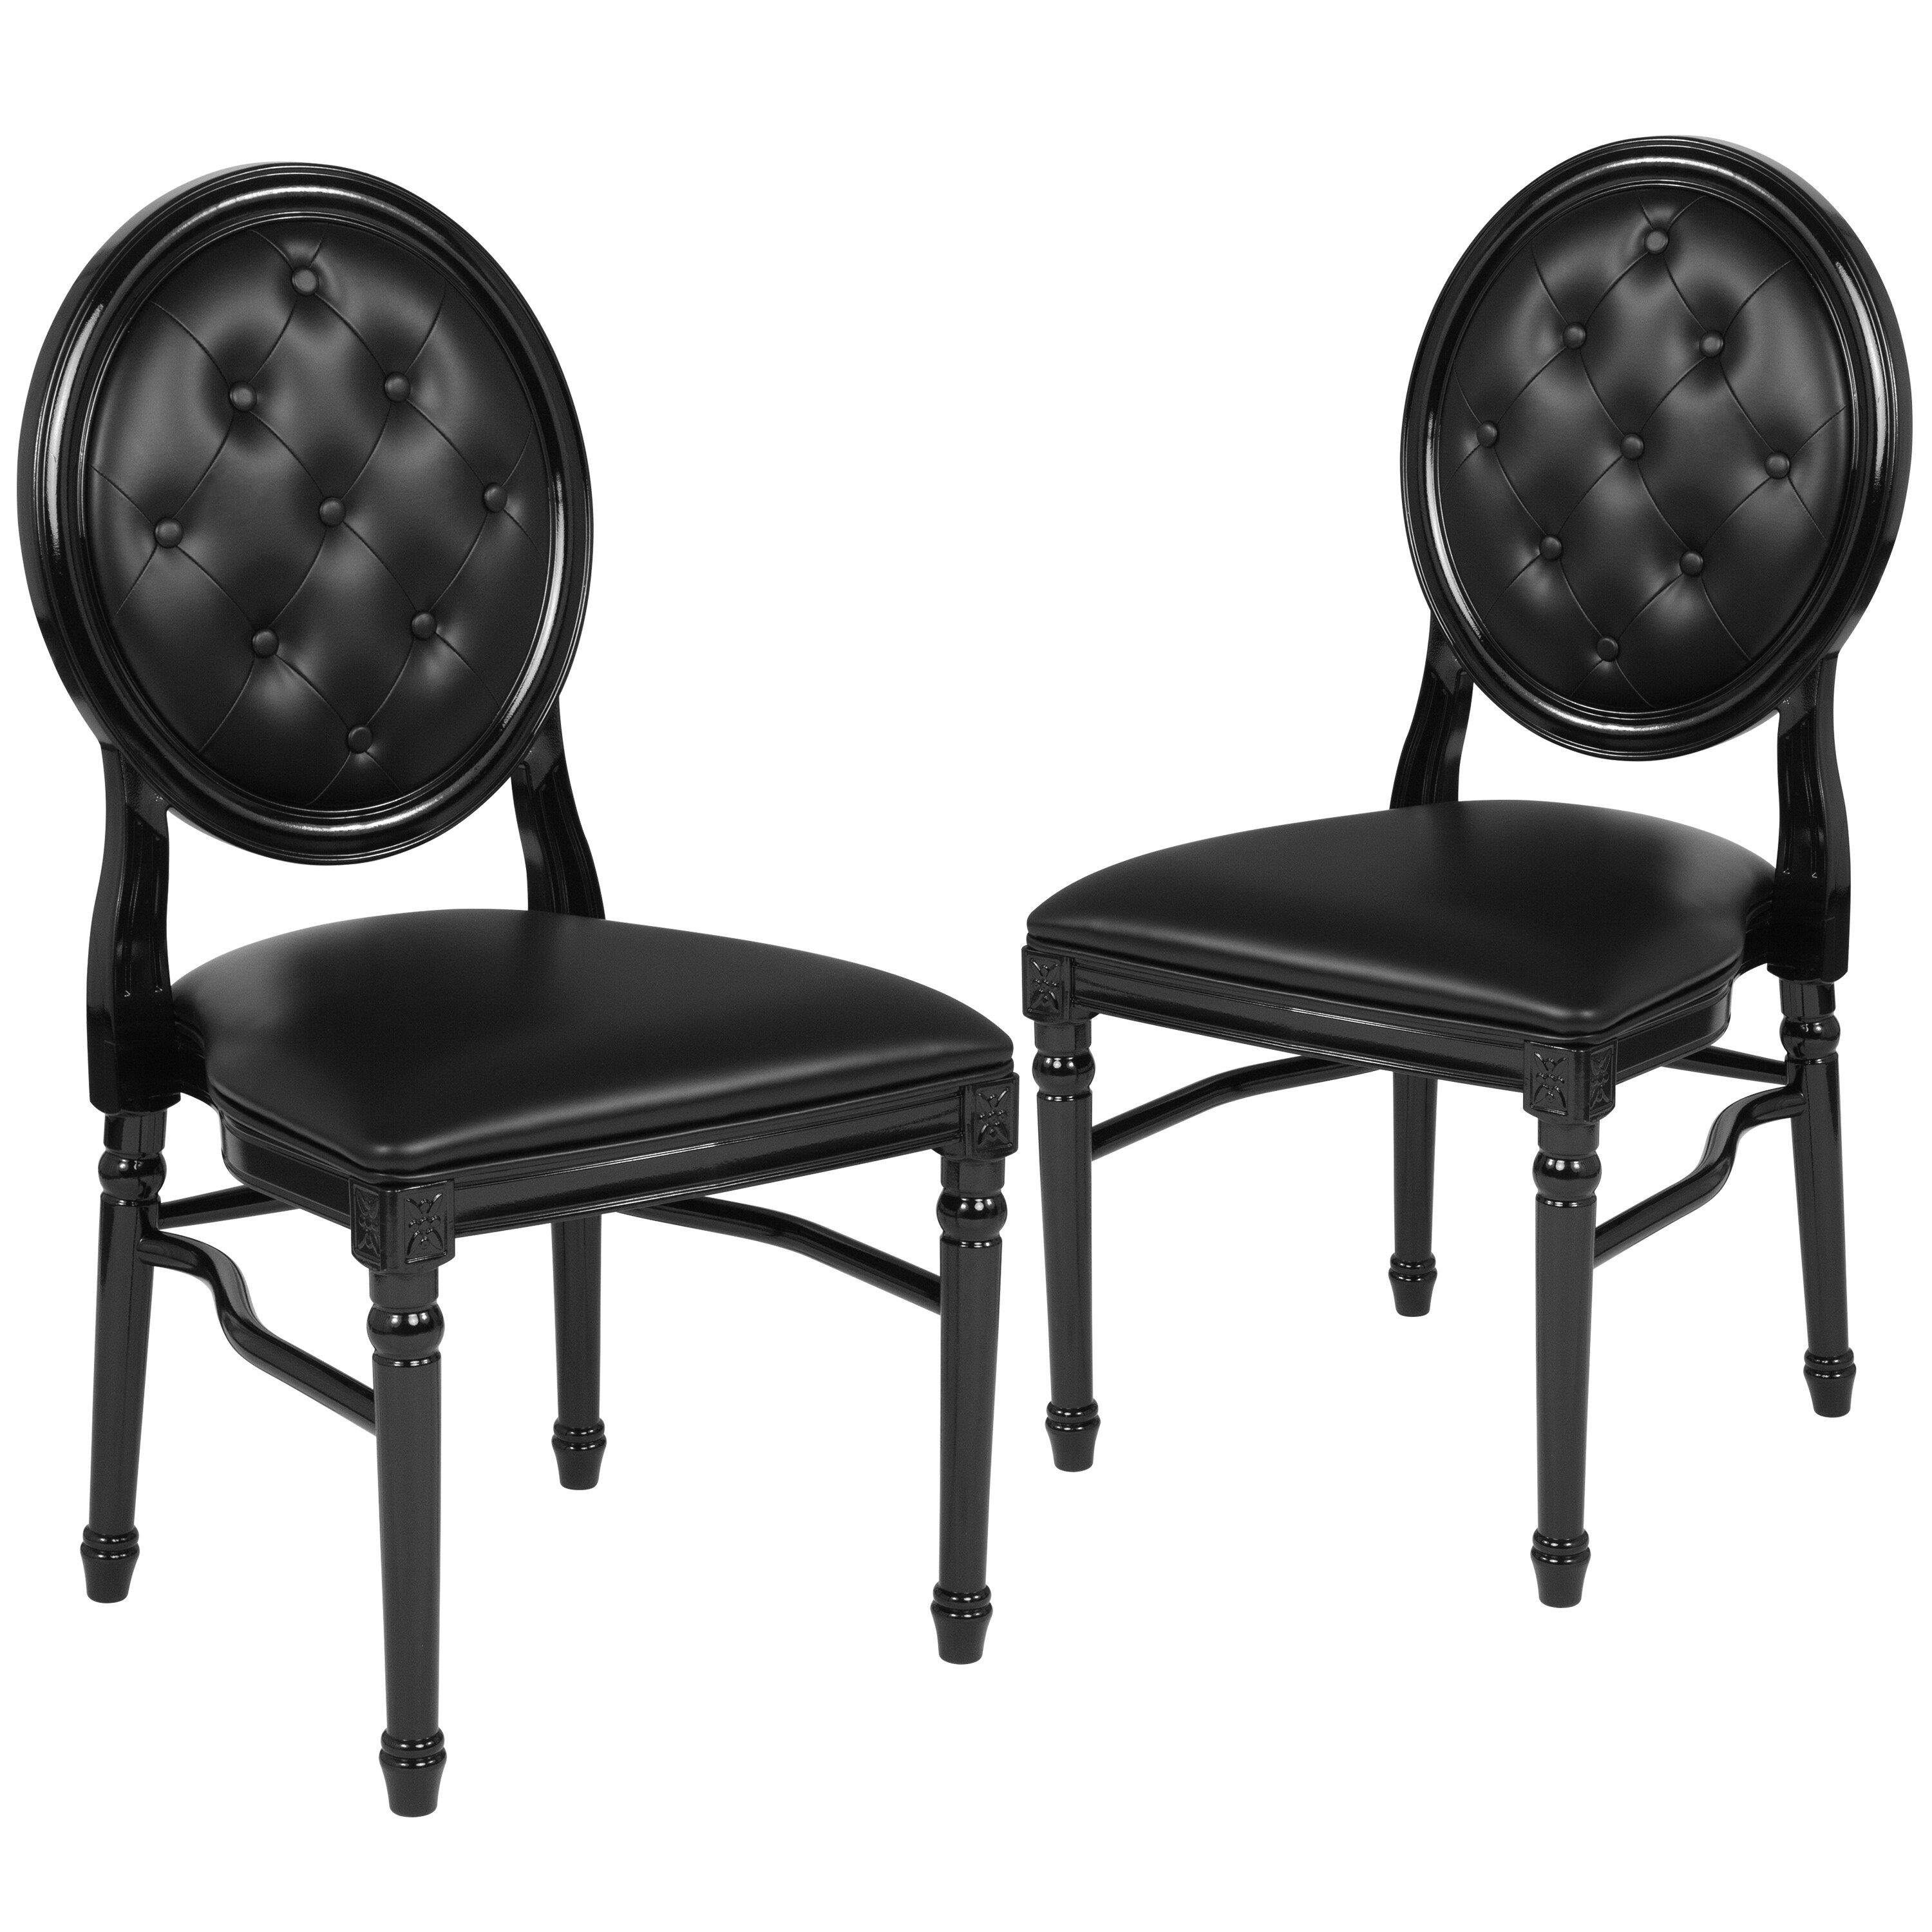 Krauss King Louis Back Side Chair Dining Chair (Set of 2) Rosdorf Park